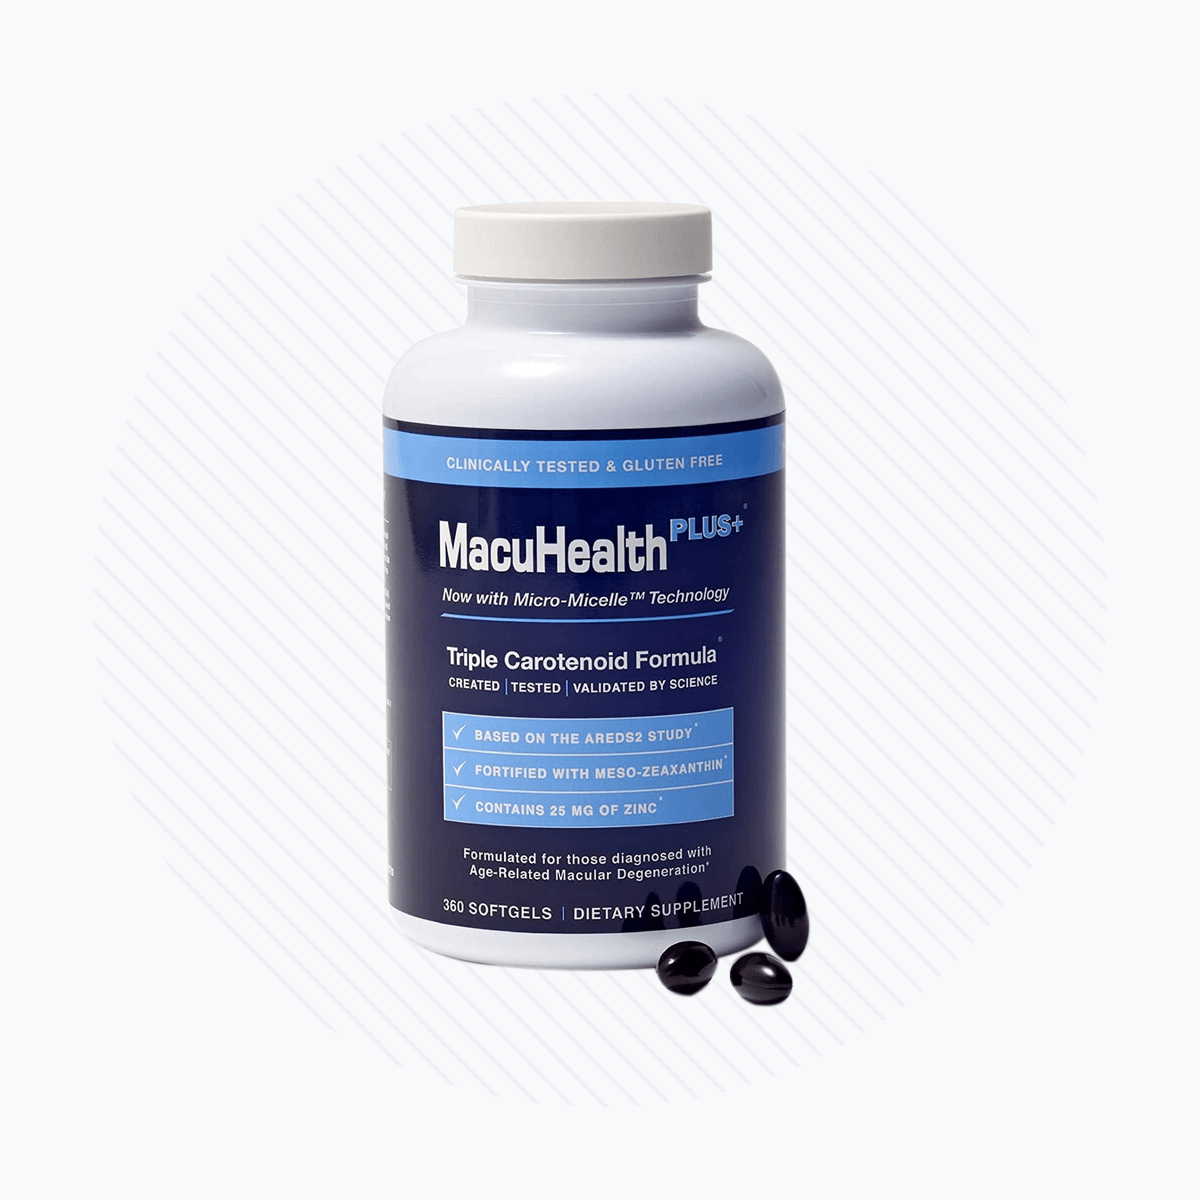 MacuHealth Plus+ Eye Supplement for Adults - Meso-Zeaxanthin, Lutein & Zeaxanthin, (90 Days Supply) - DryEye Rescue Store